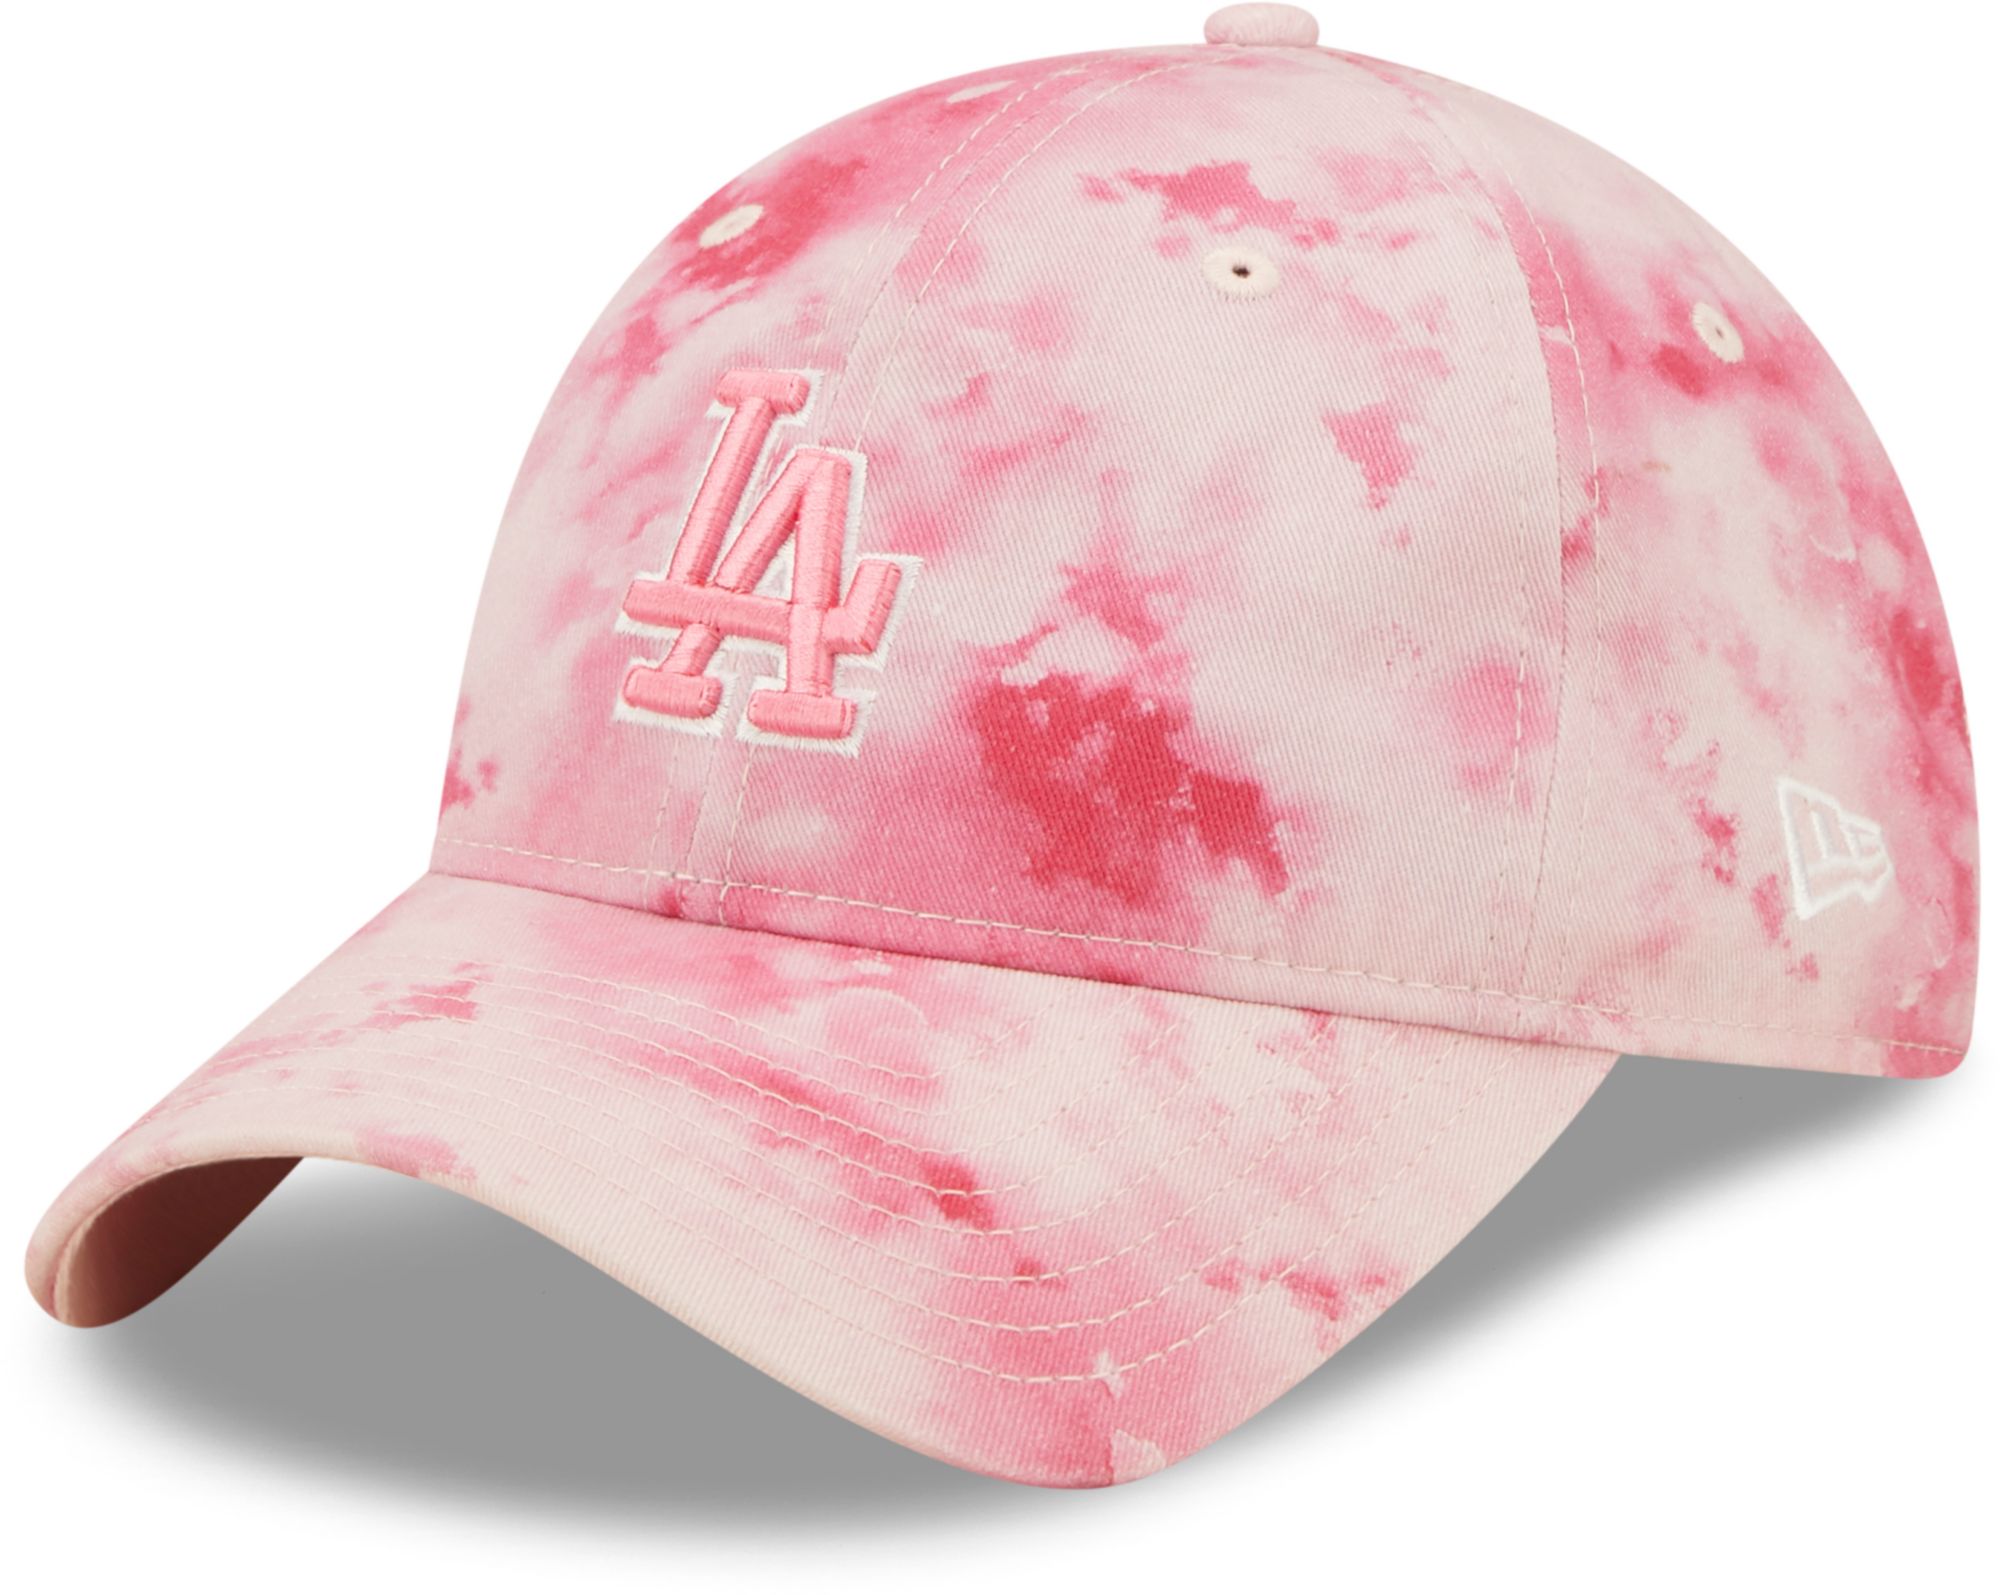 New Era / Women's Mother's Day '22 Los Angeles Dodgers Pink